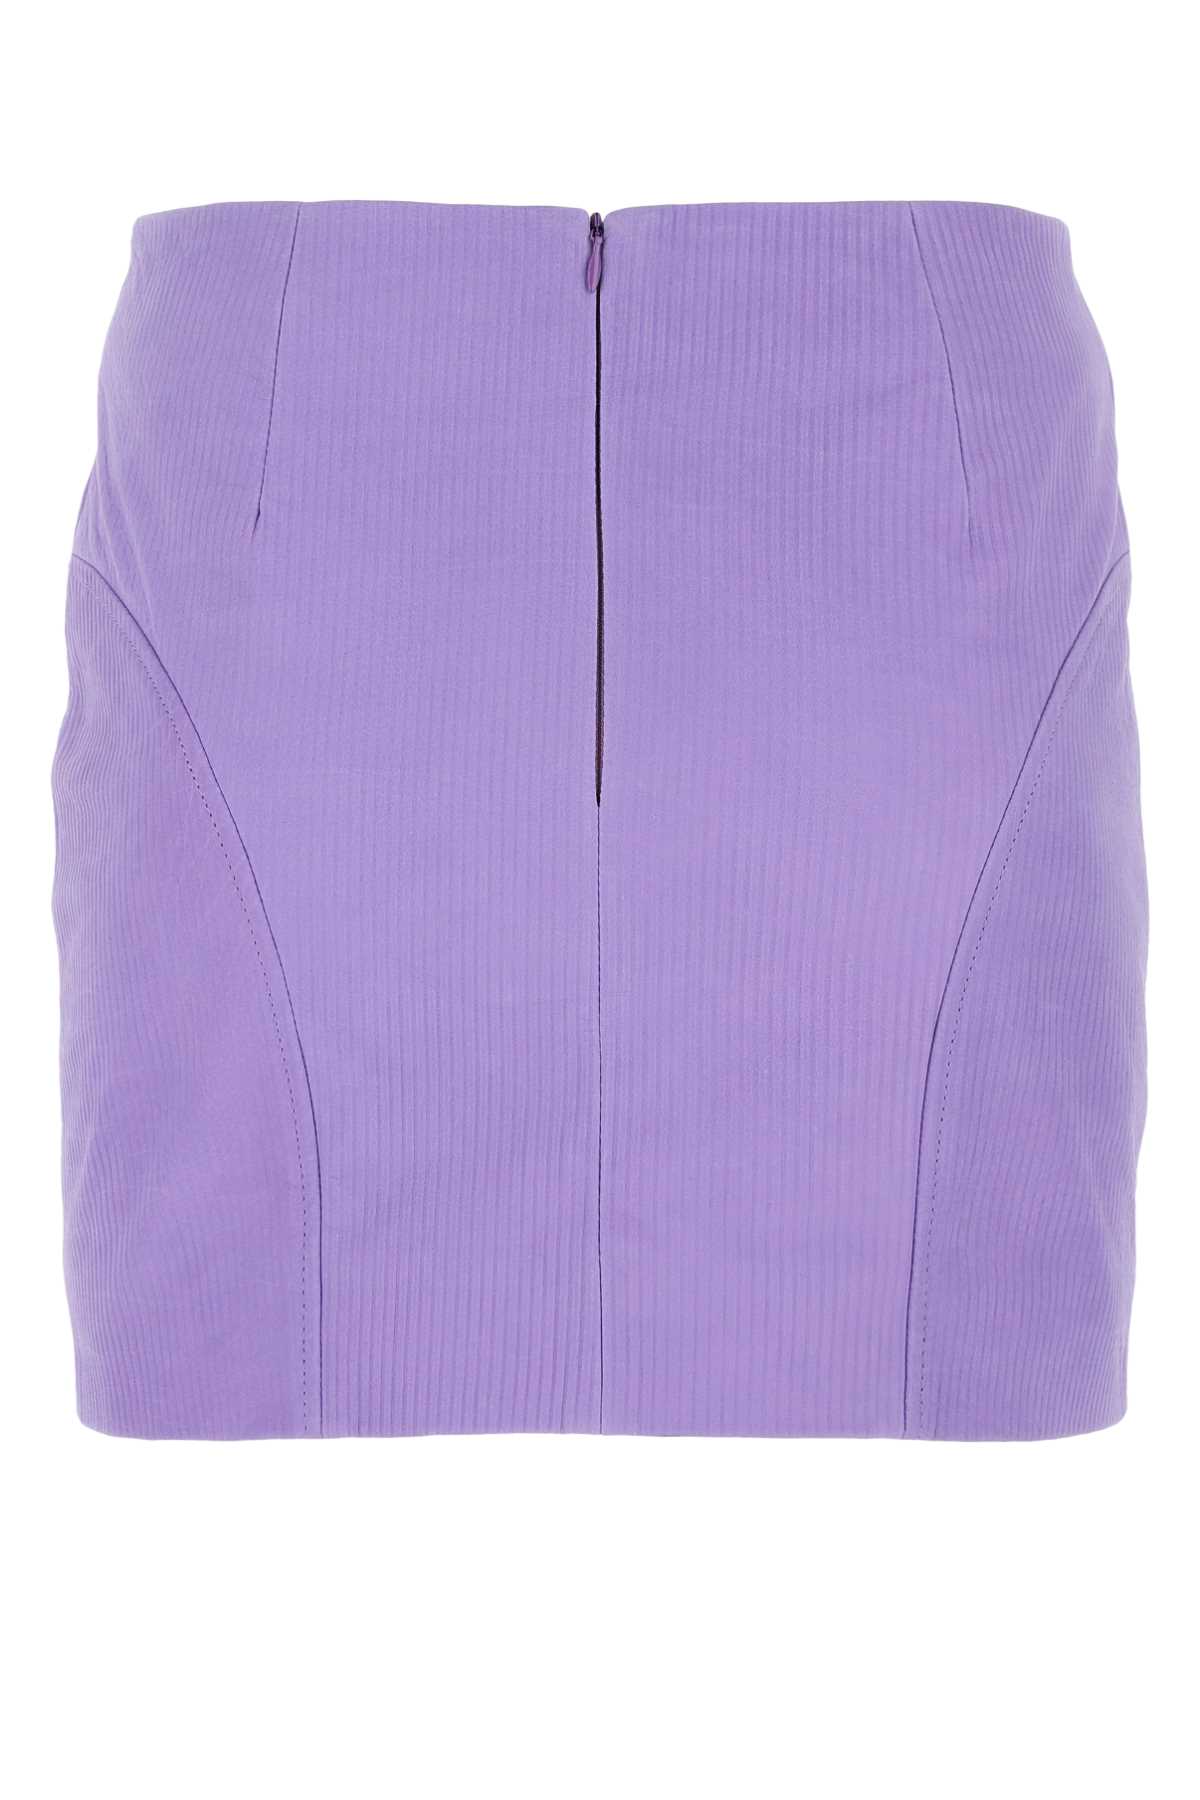 Remain Birger Christensen Lilac Leather Mini Skirt In Passionflower